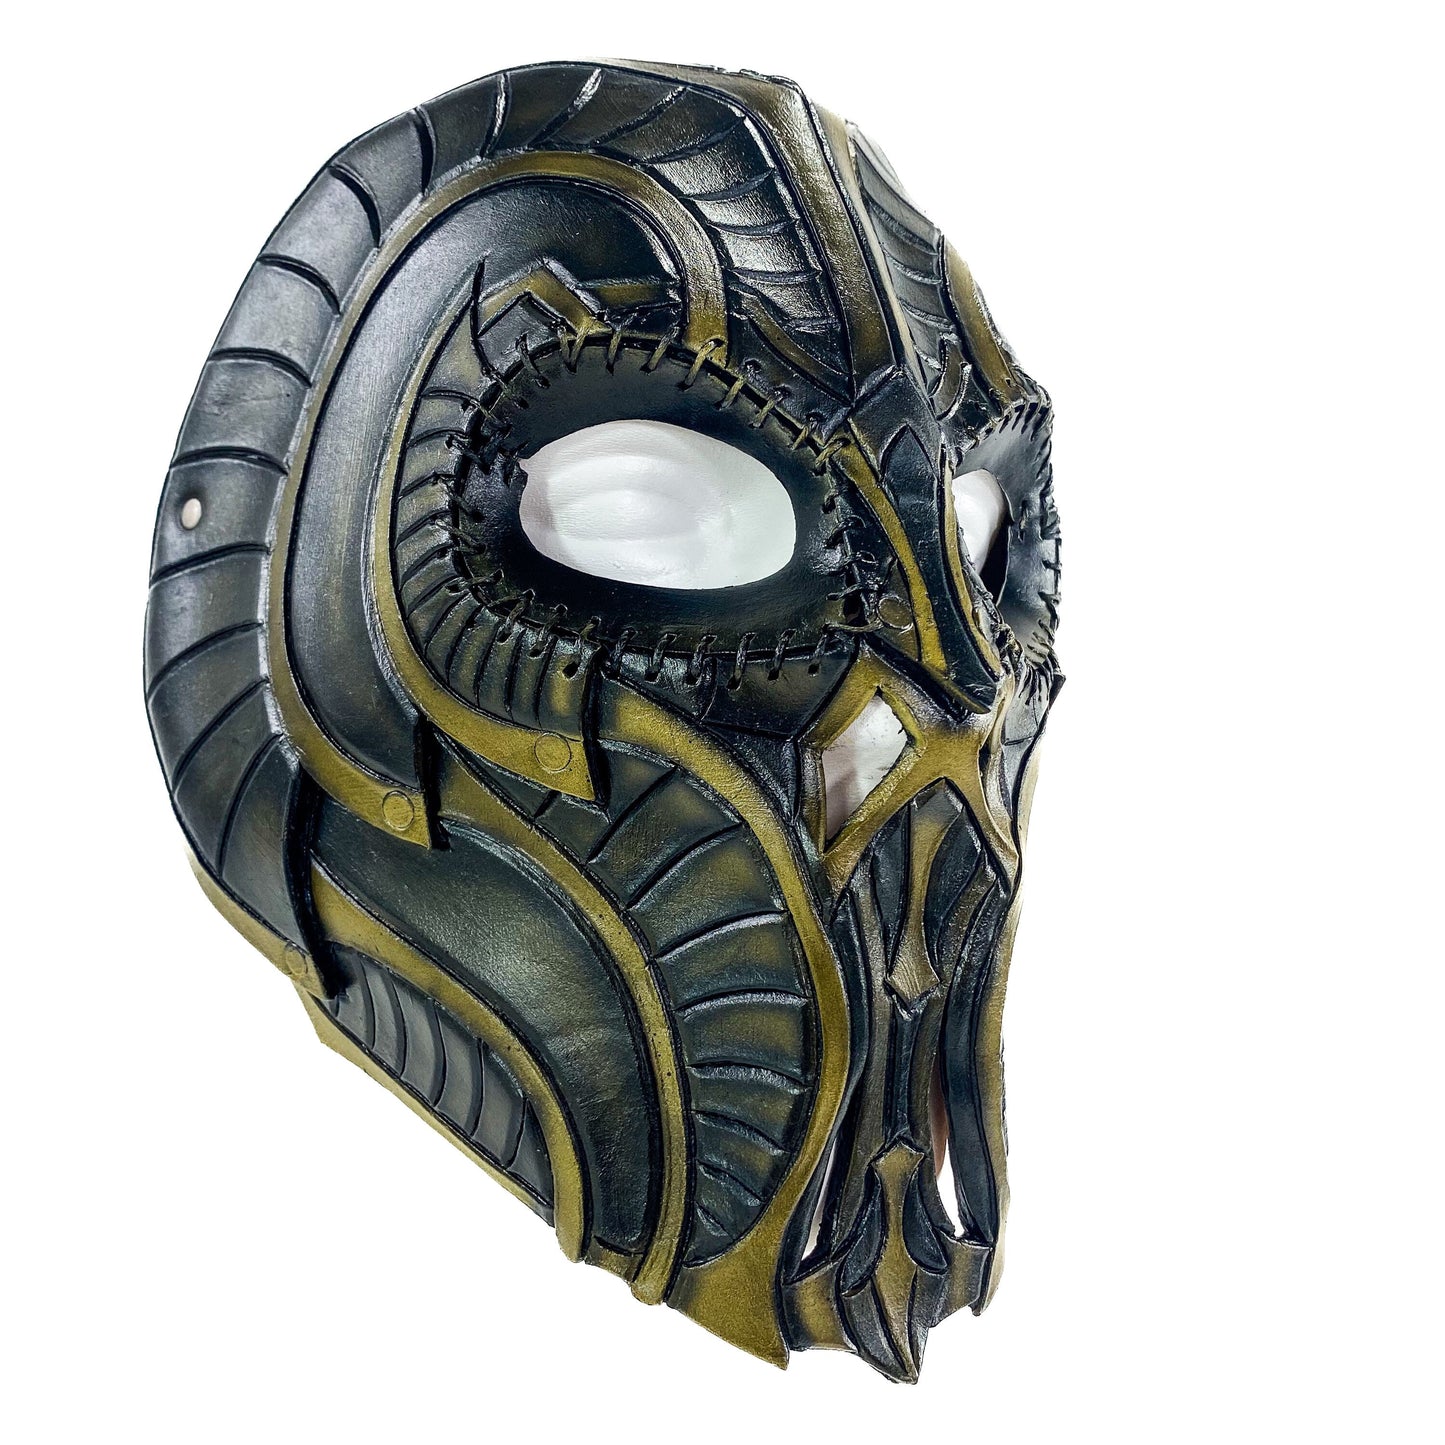 Handmade Genuine Leather Mask in Natural Colors